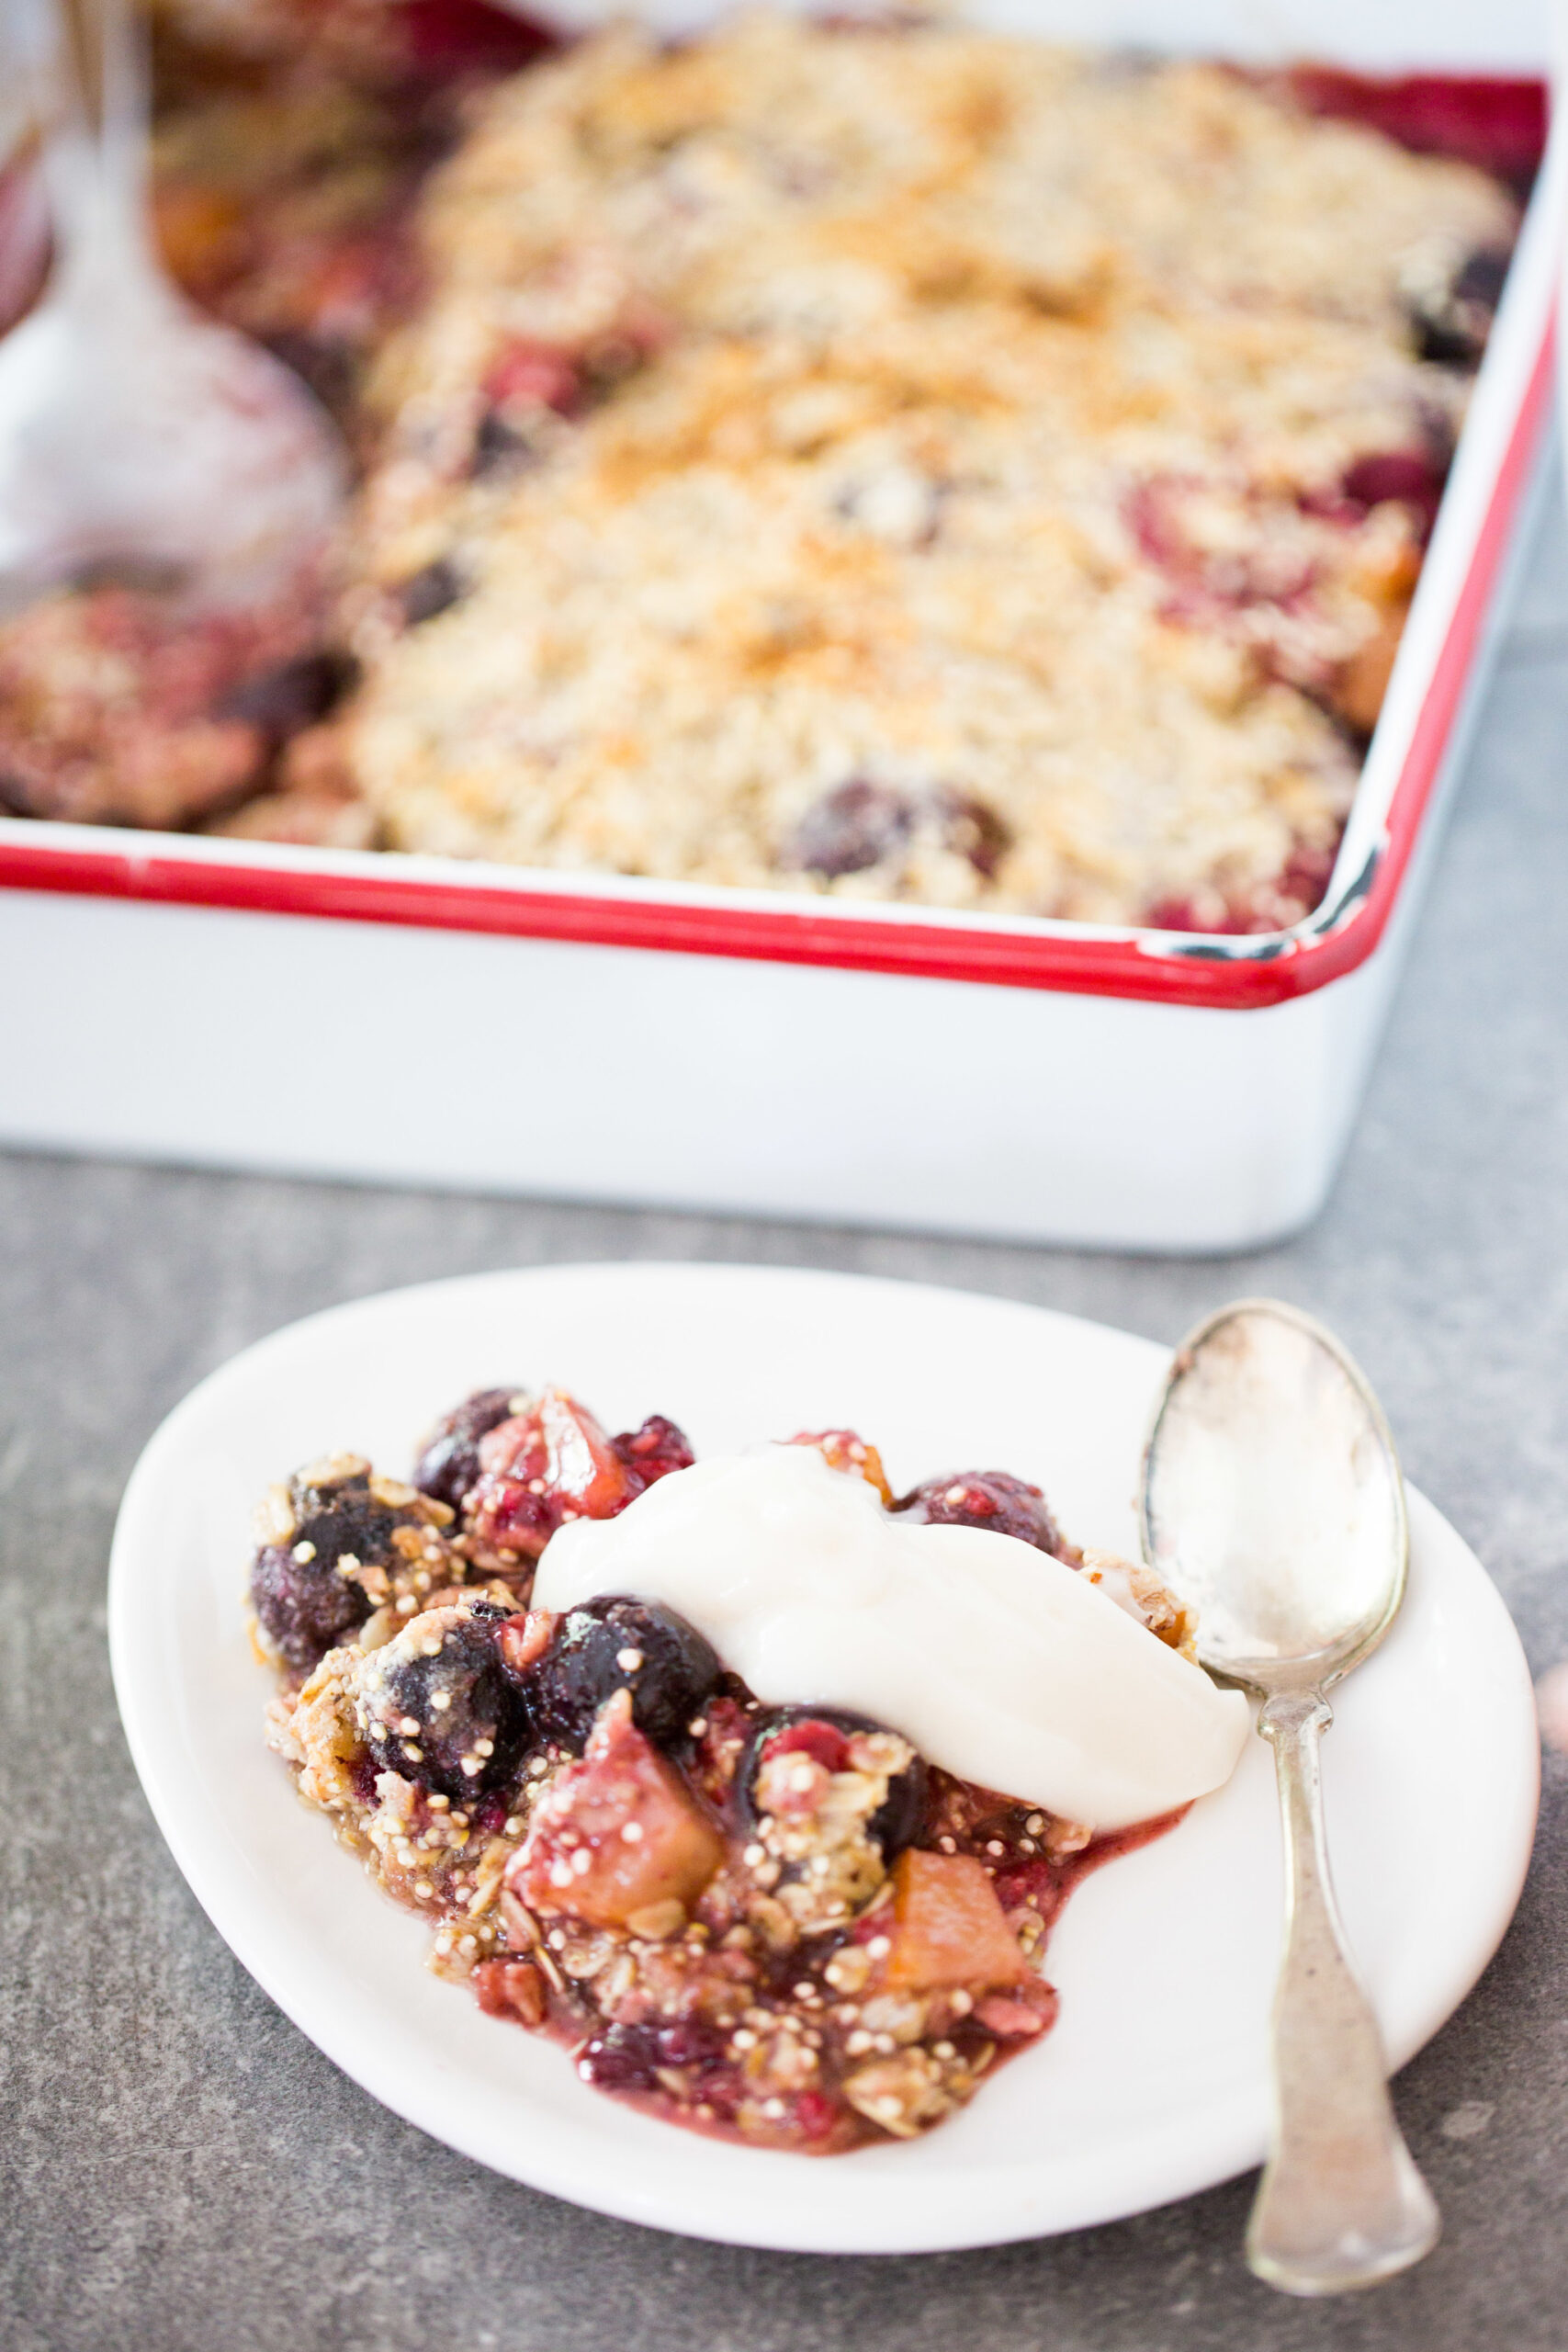 Cherry, raspberry and pear crumble recipe. Easy, vegan and full of flavor dessert.